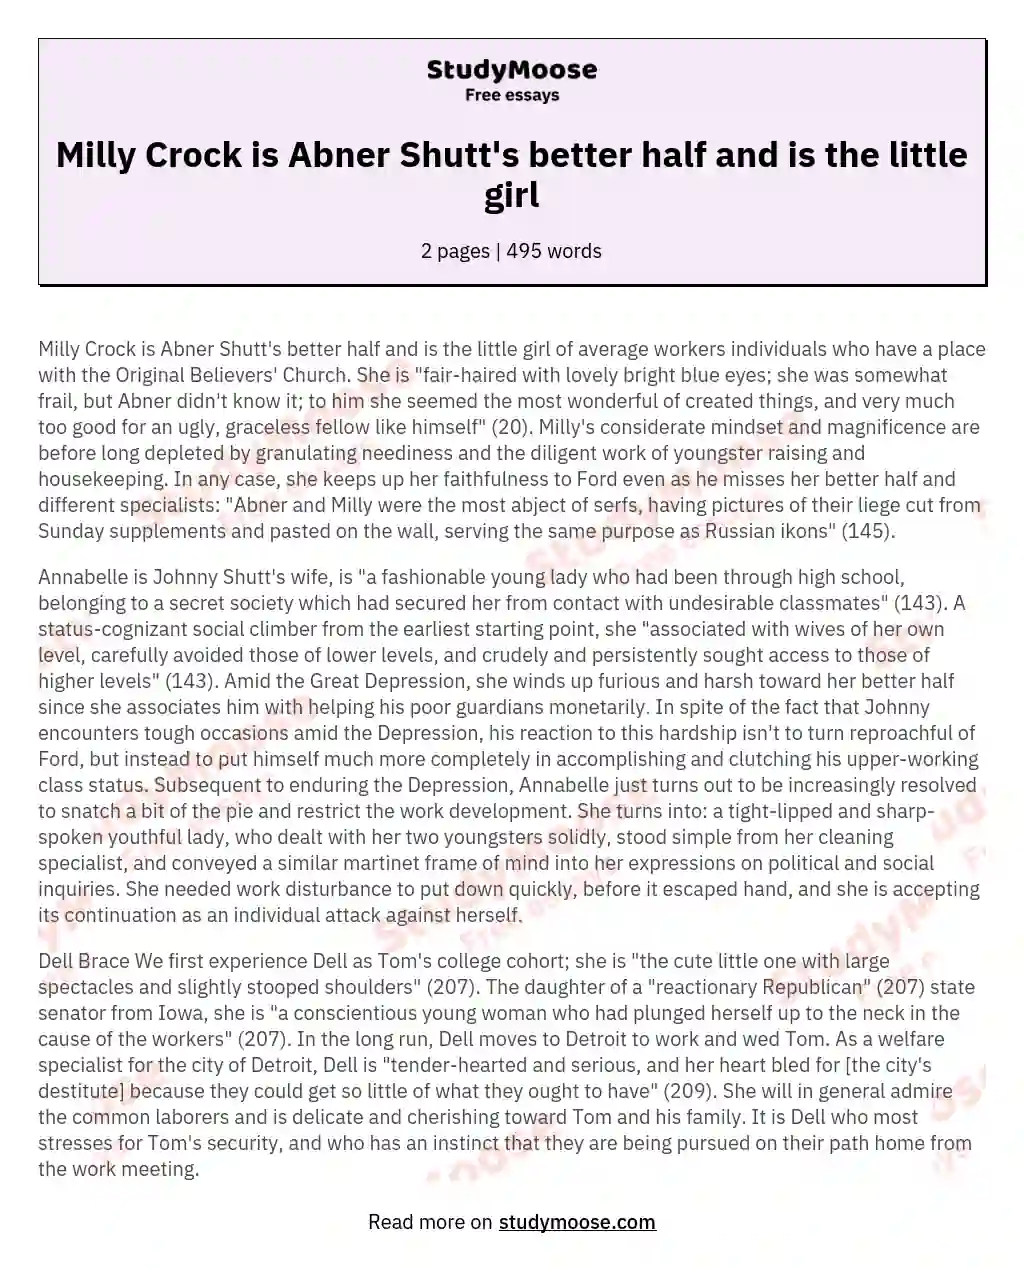 Milly Crock is Abner Shutt's better half and is the little girl essay